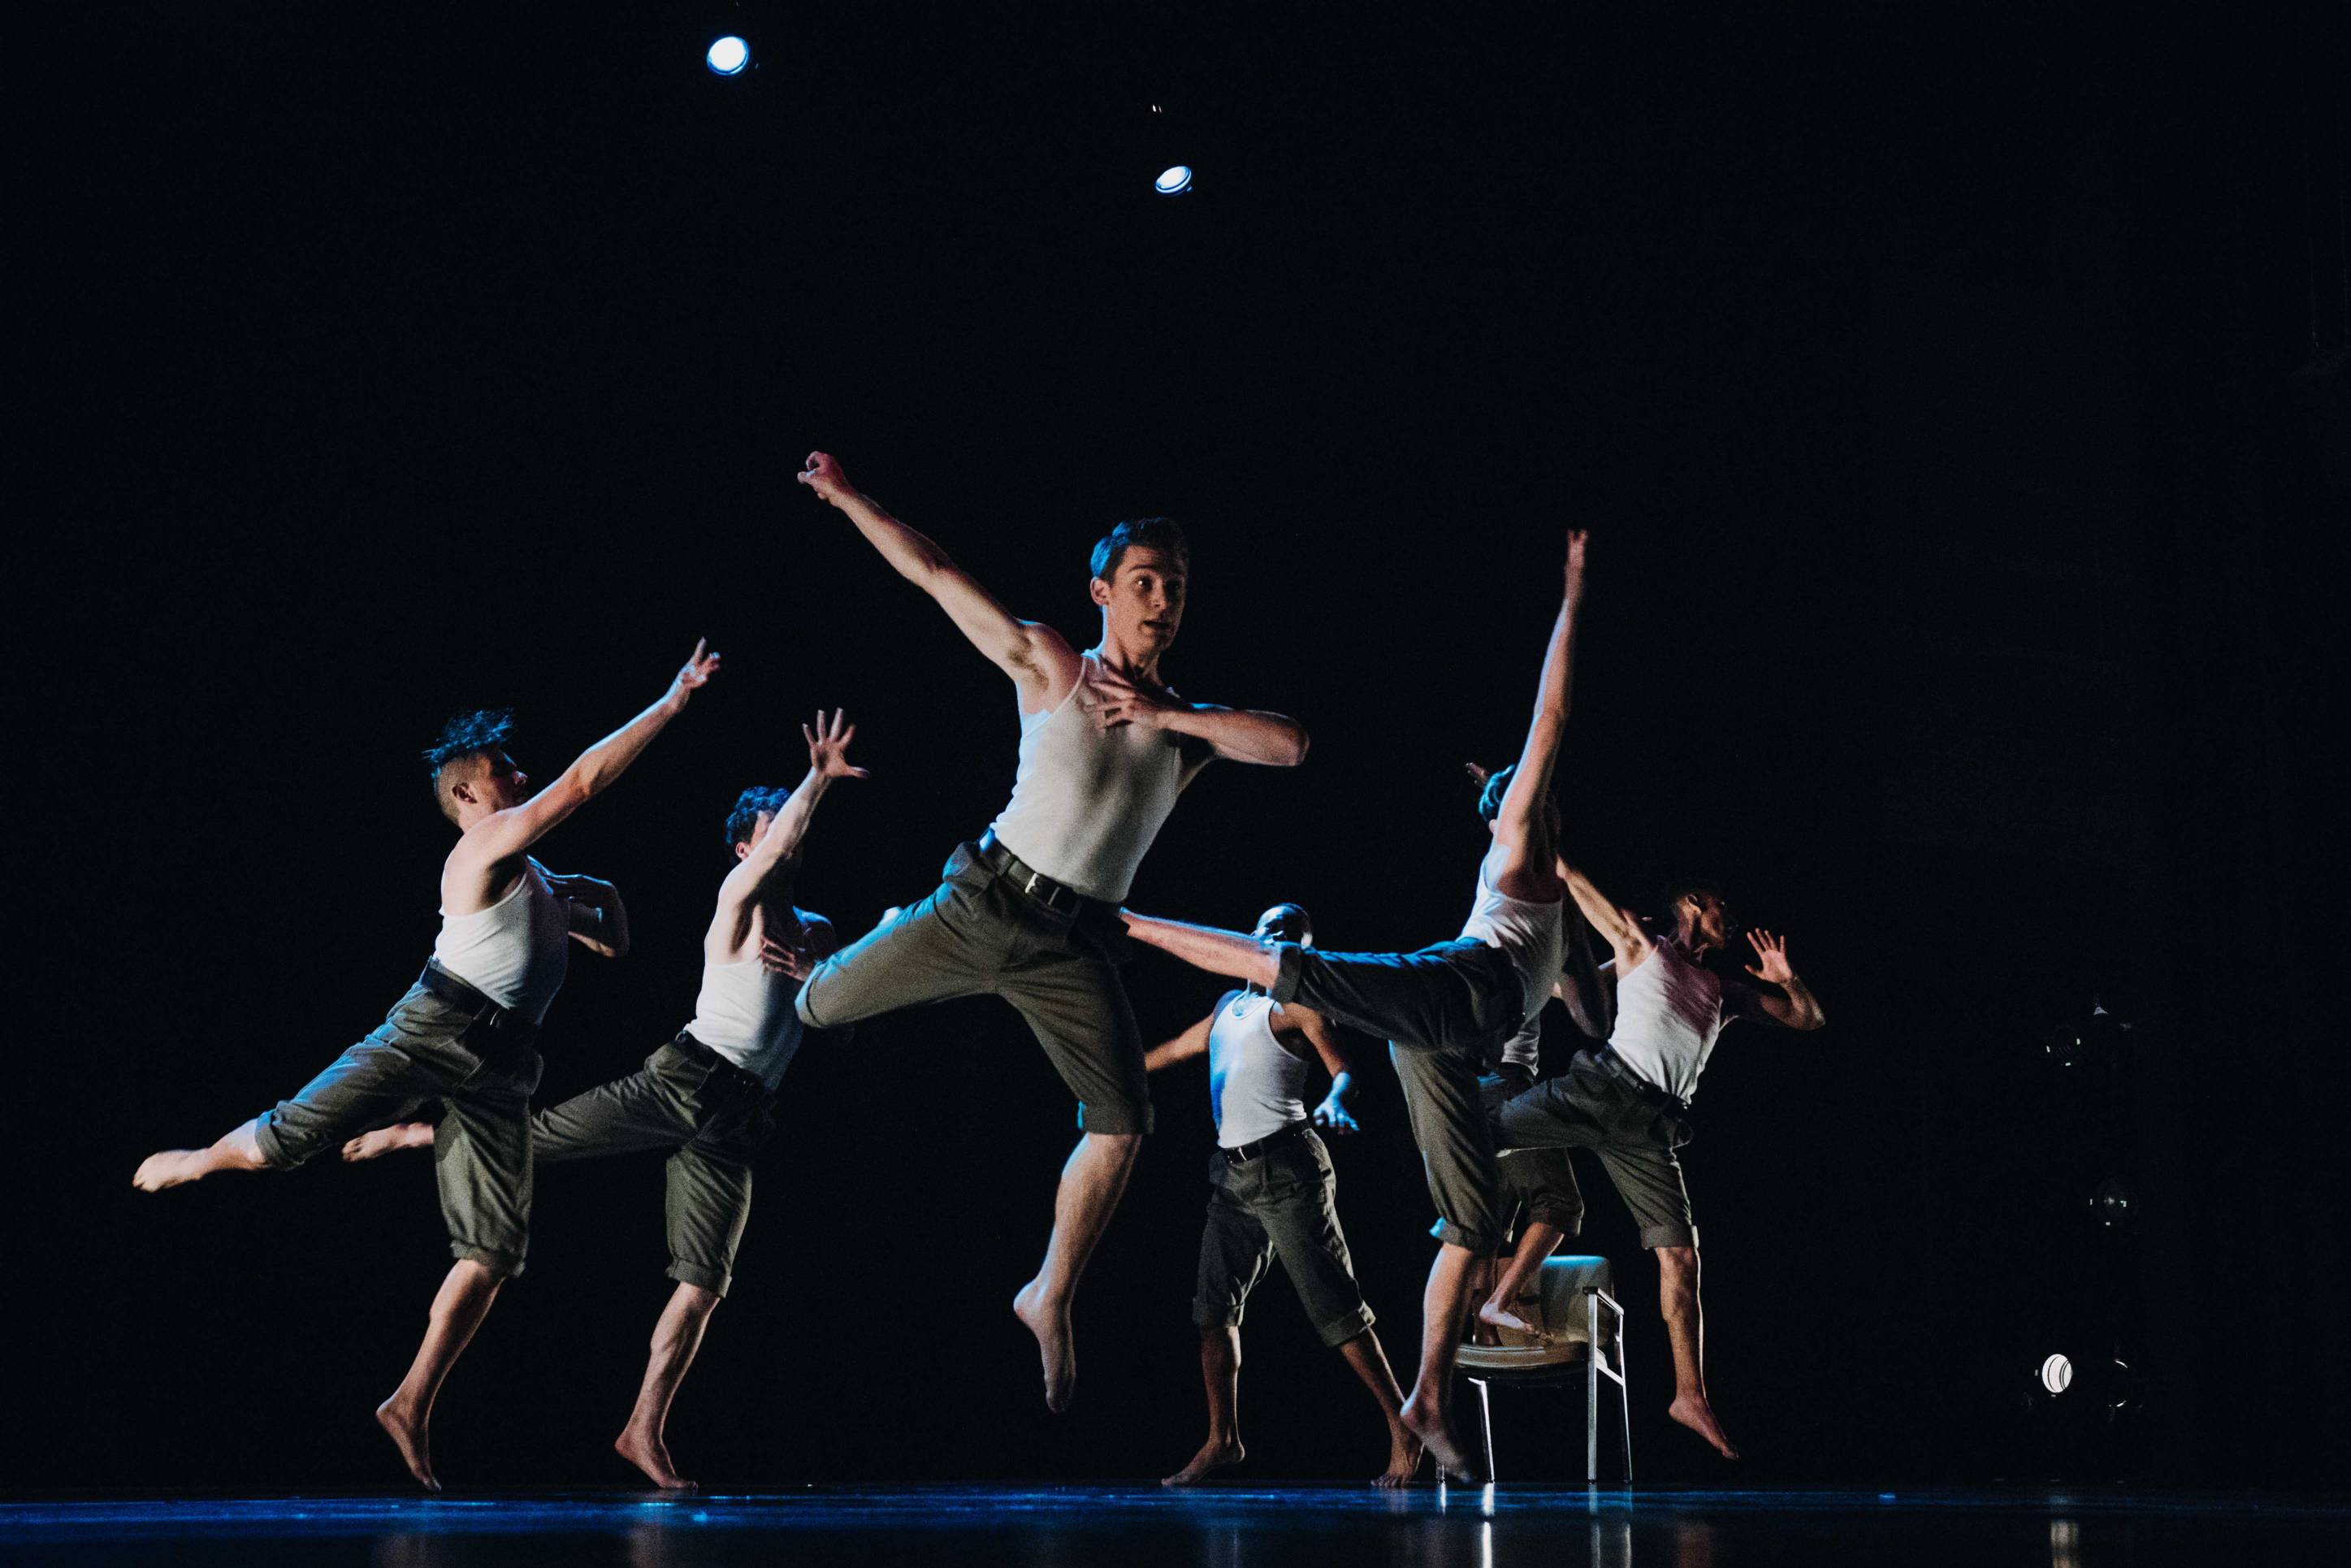 Group of dancers leaping across stage at Texas State